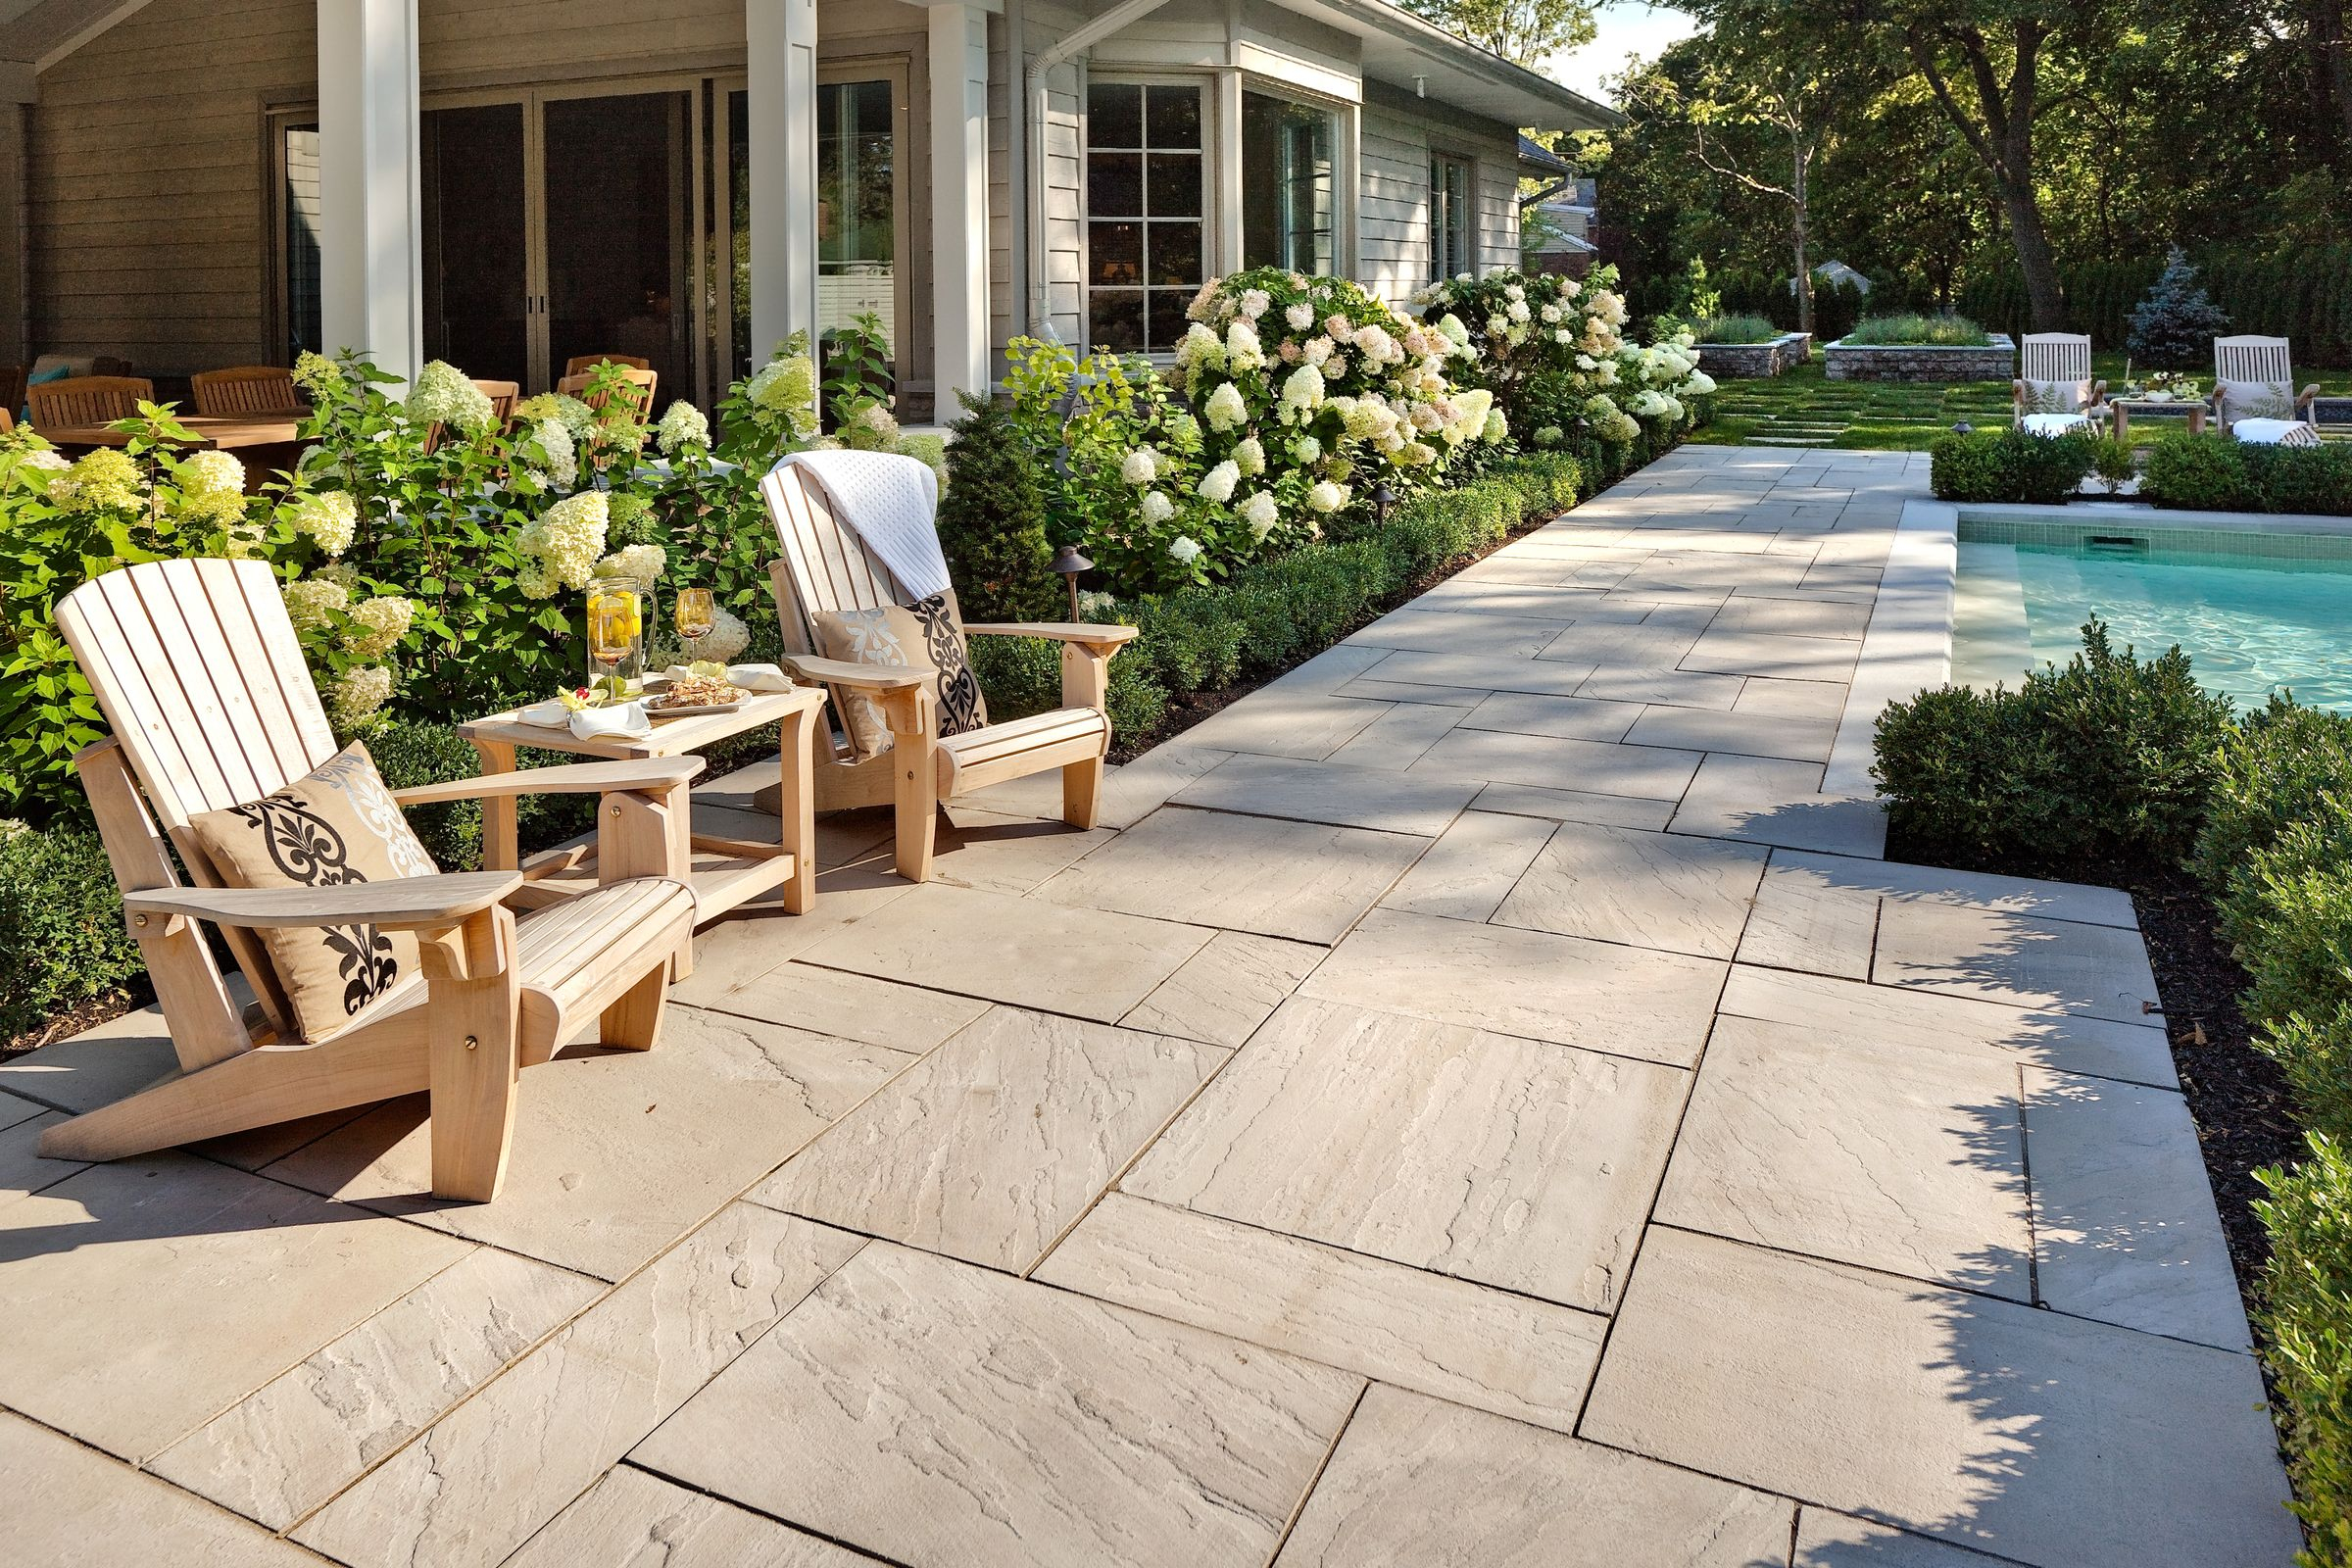 Fantastic Stamped Concrete Vs Pavers For Modern Outdoor in dimensions 2400 X 1600